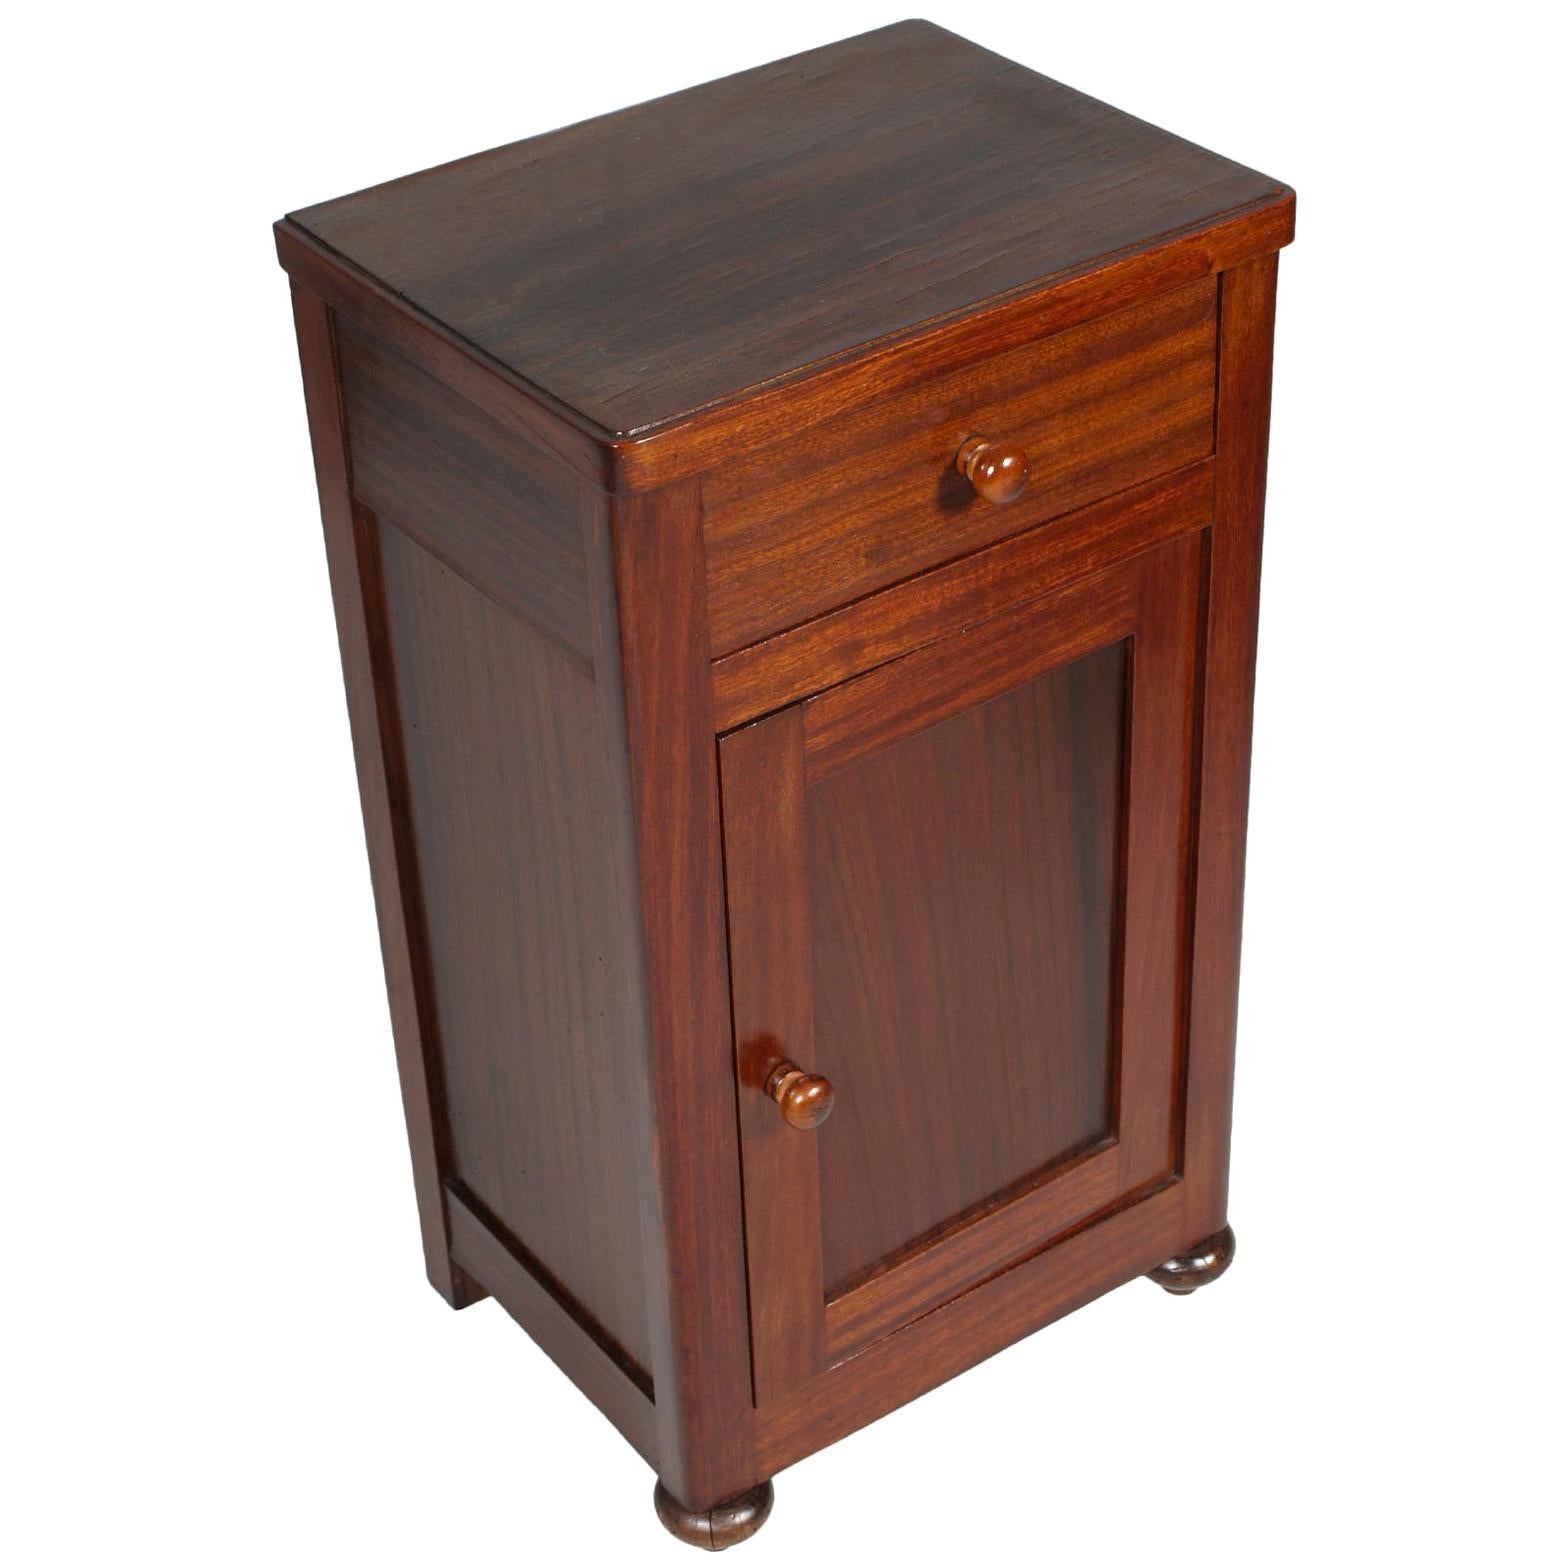 1900s Rustic Country Nightstand, Bedside Table, Walnut and Mahogany, Restored For Sale